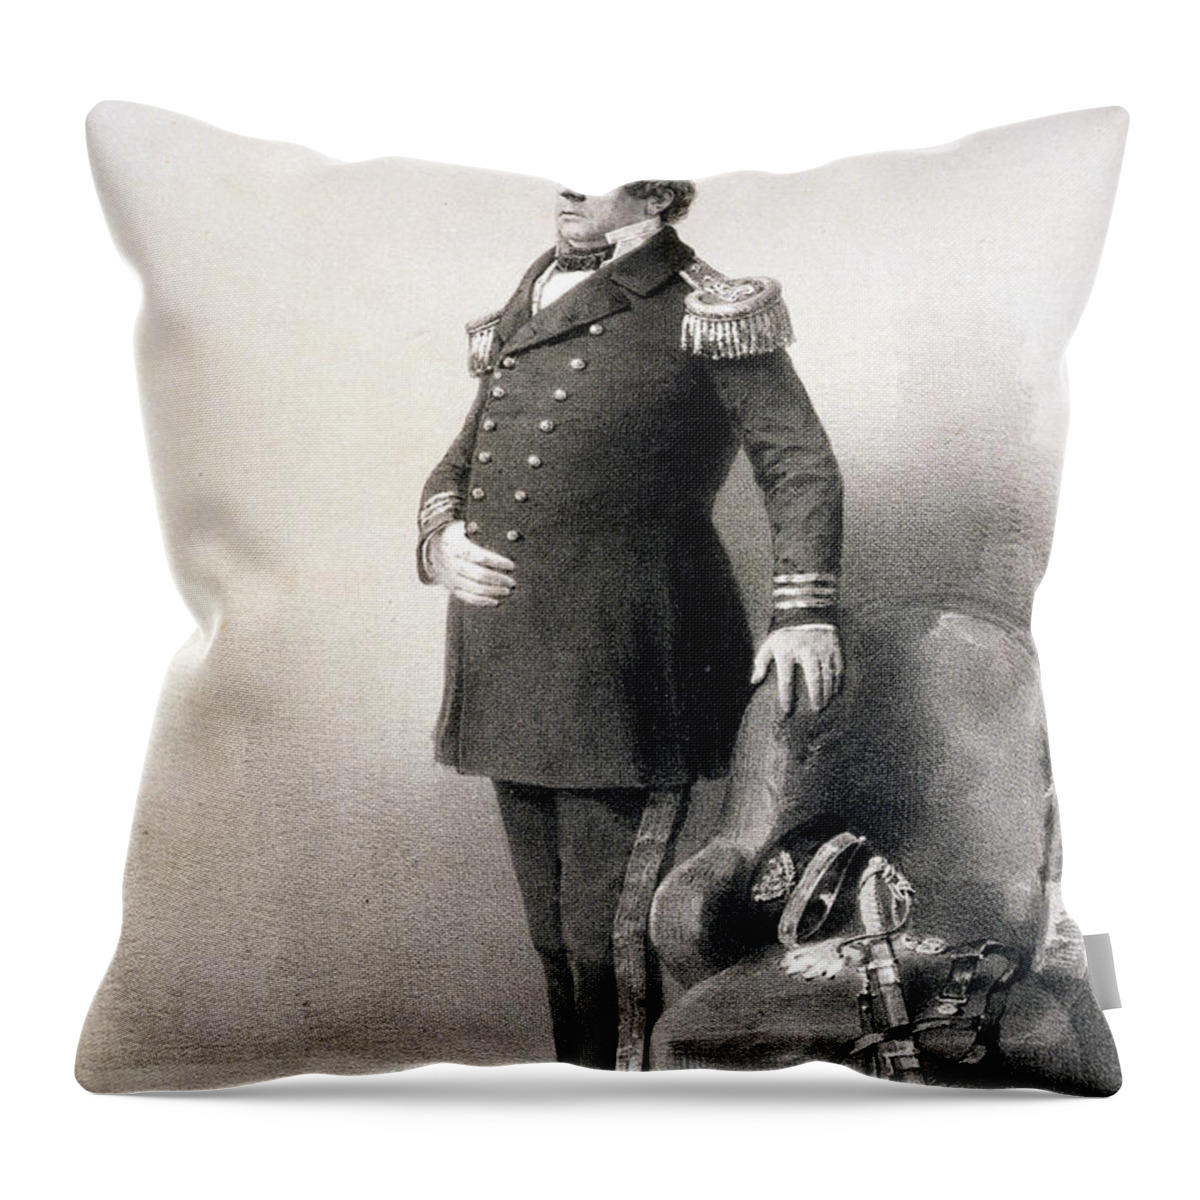 American Naval Officer Throw Pillow featuring the painting Commodore Matthew Calbraith Perry by Wilhelm Heine